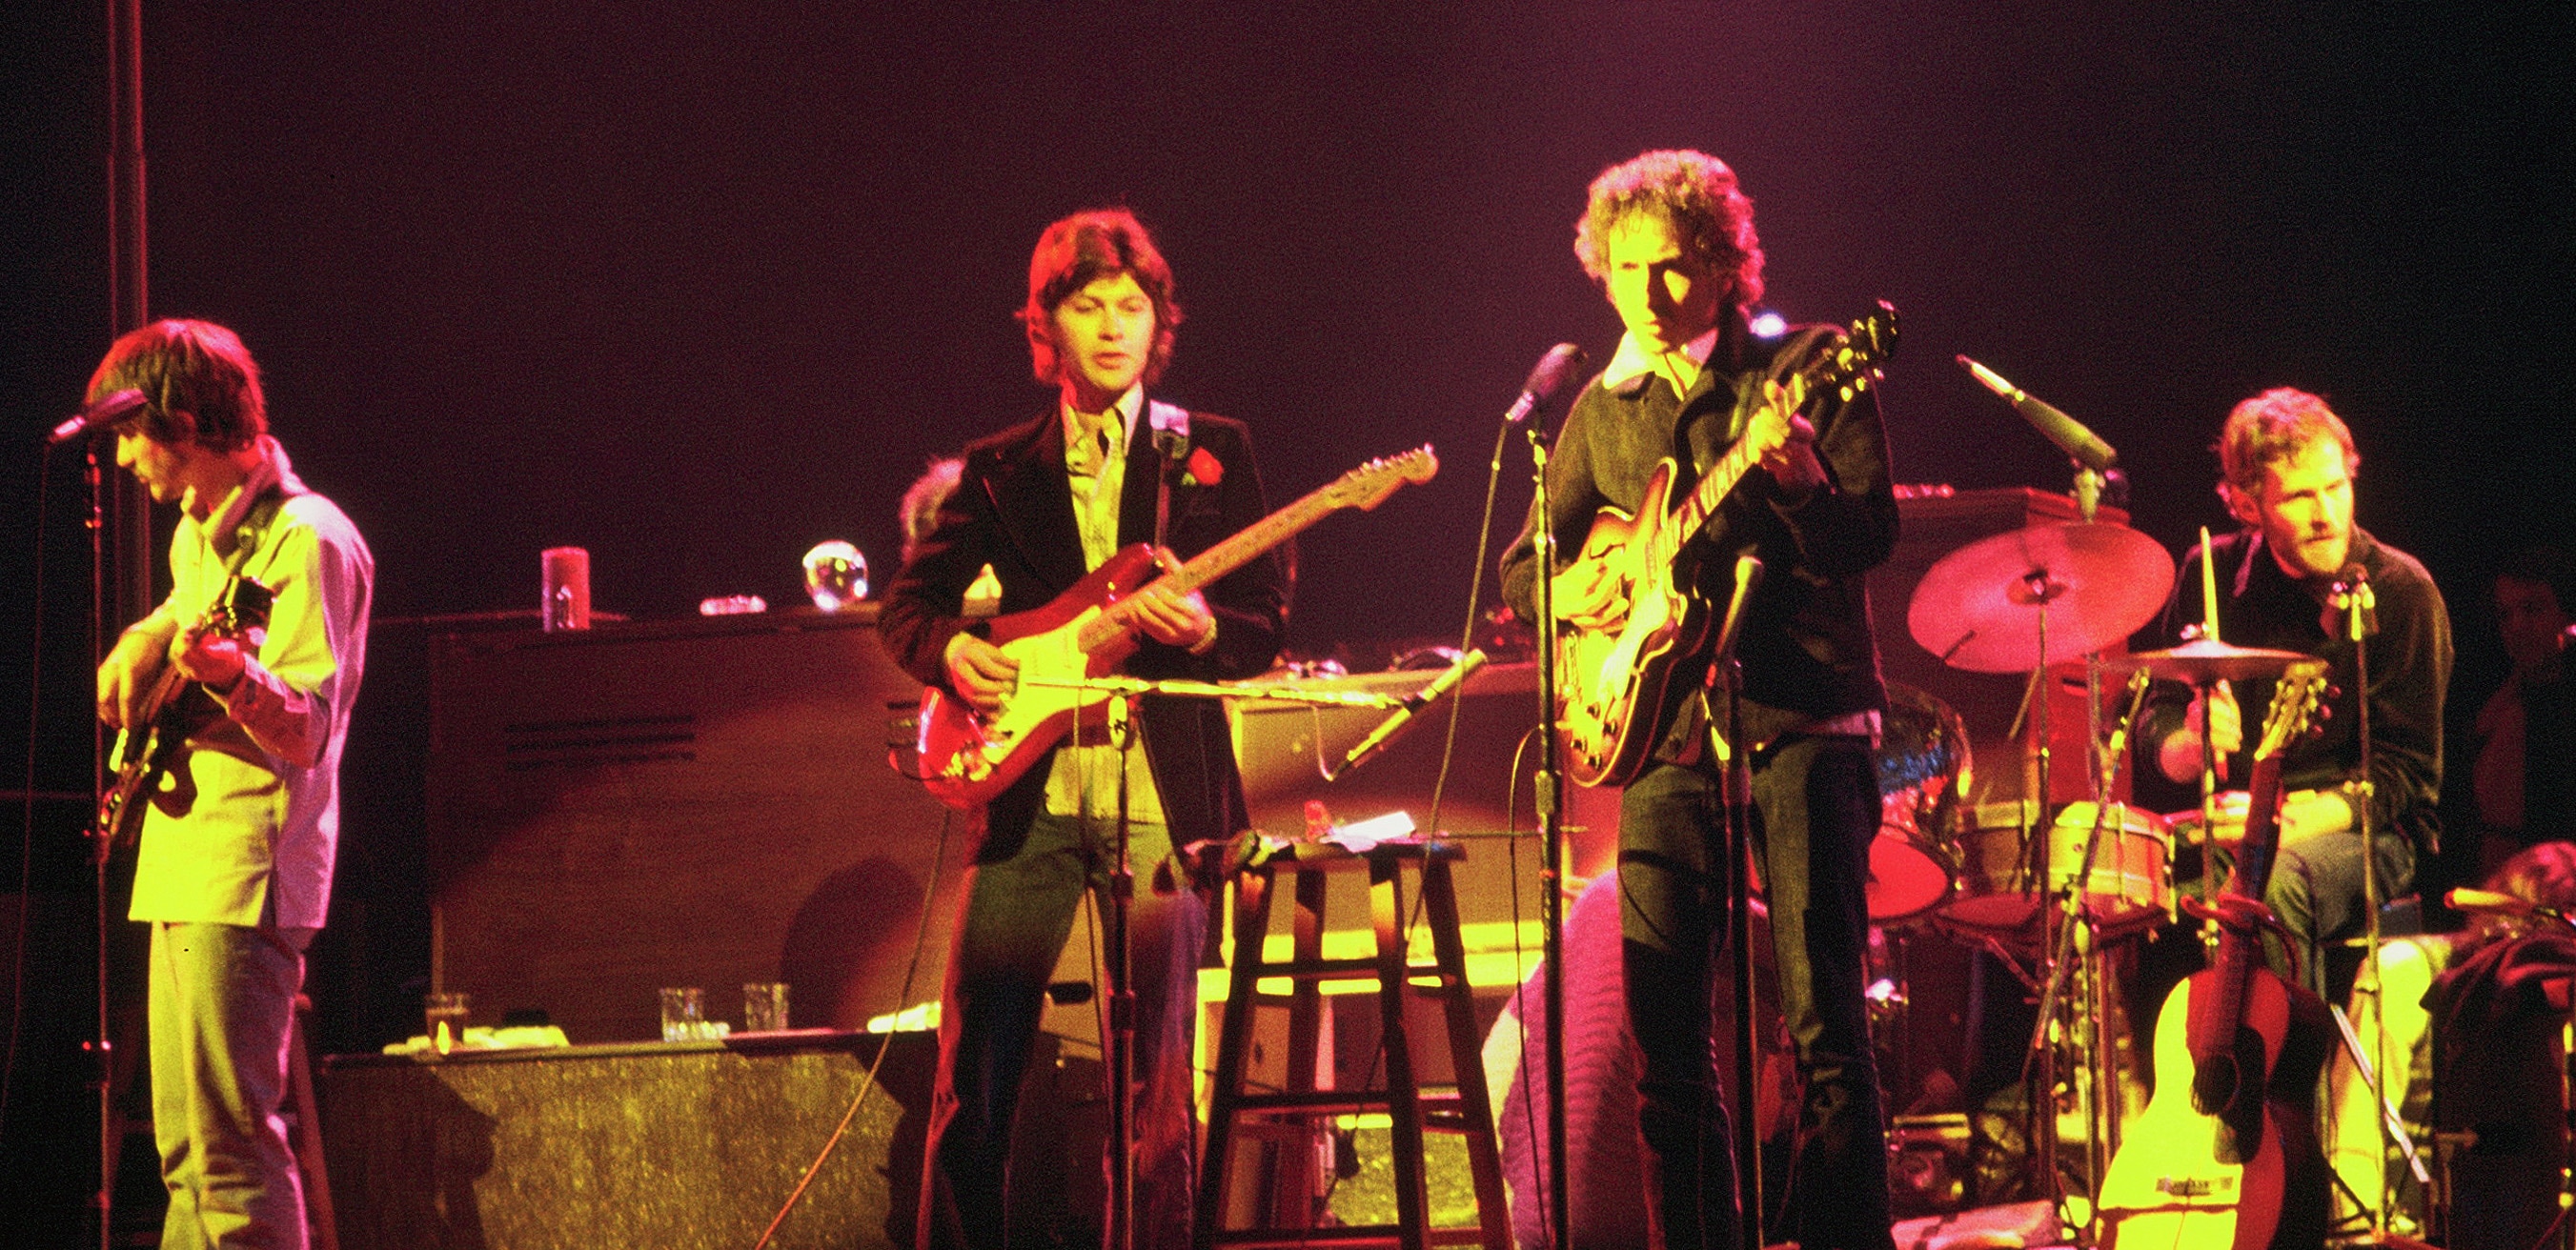 Four men stand on stage dressed in 1970s clothes. One holds a guitar and stands in front of a microphone. To his left two men hold and play guitars. On the far right, a man sits at a drum kit playing.